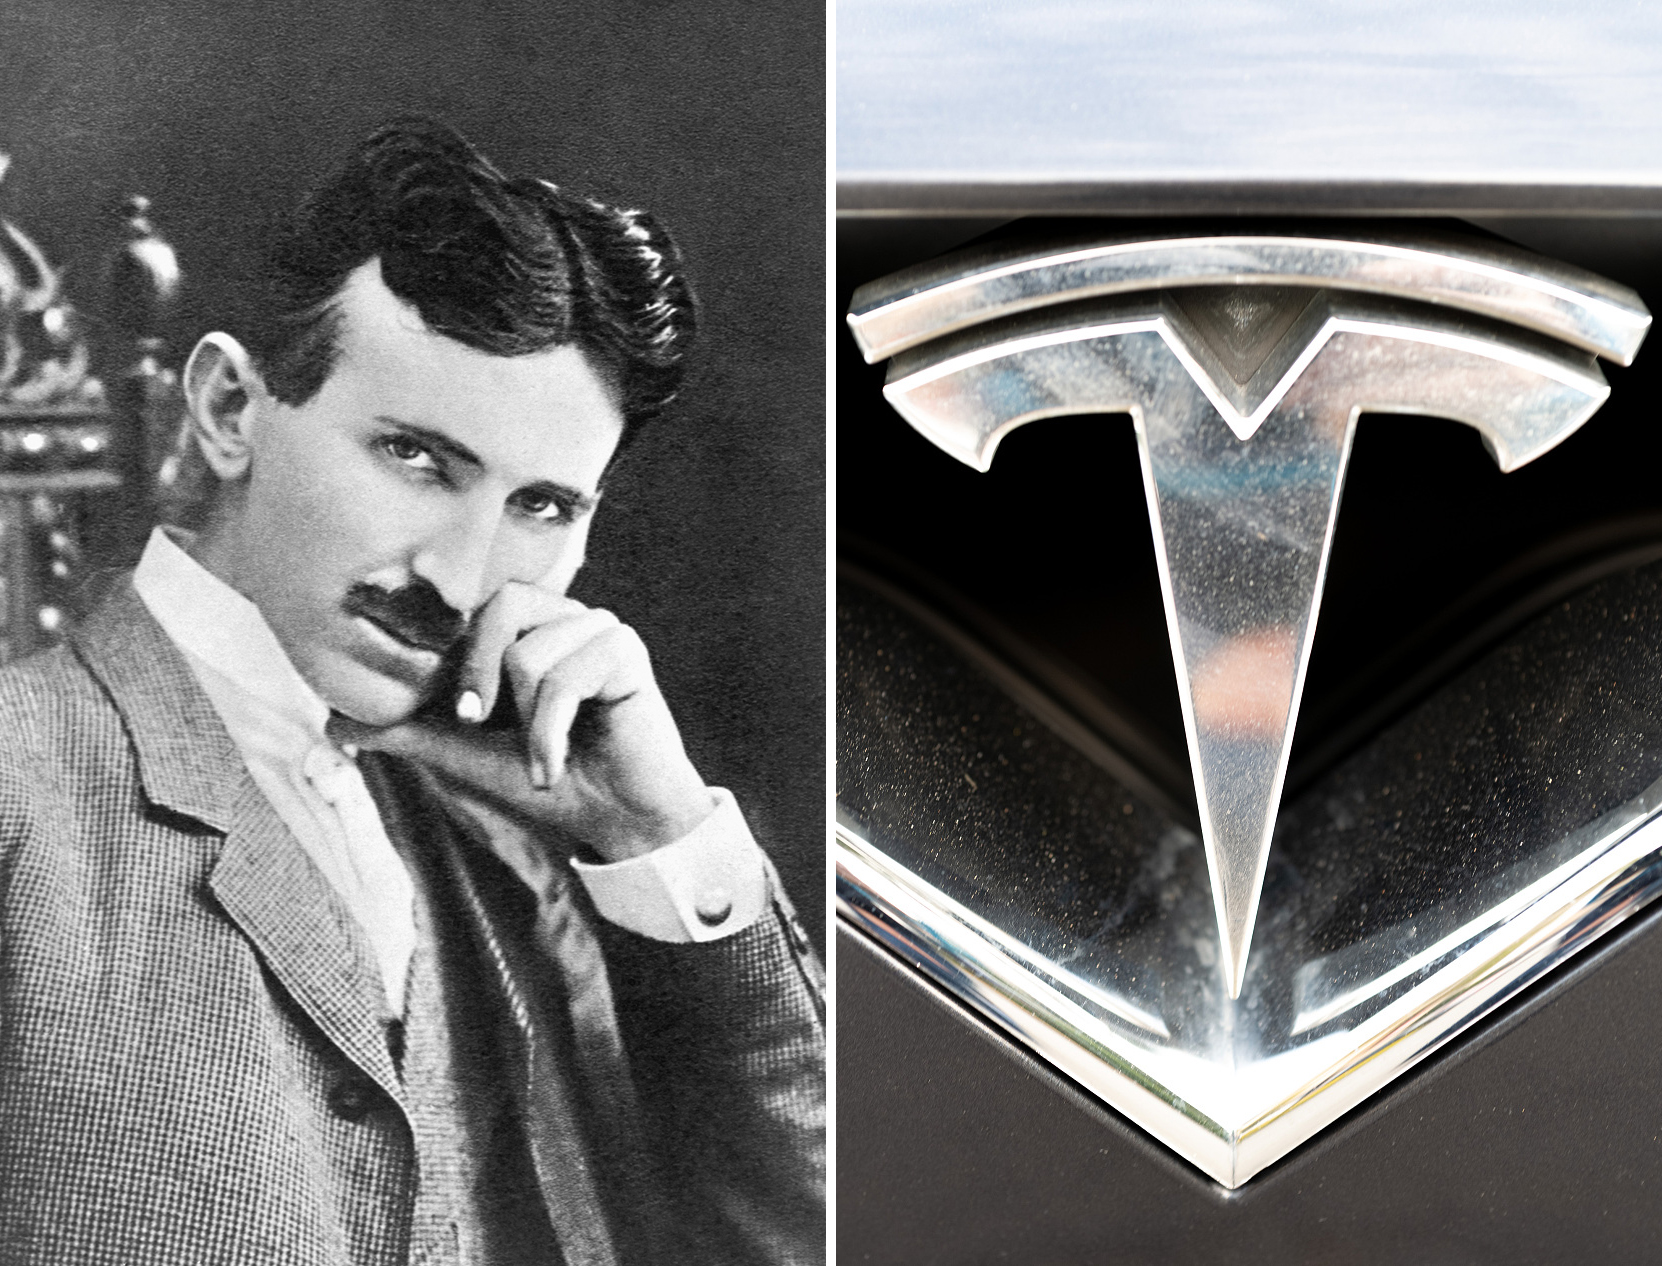 The well-known company Tesla is named after the Serbian-American inventor and electrical engineer Nikola Tesla. /CFP